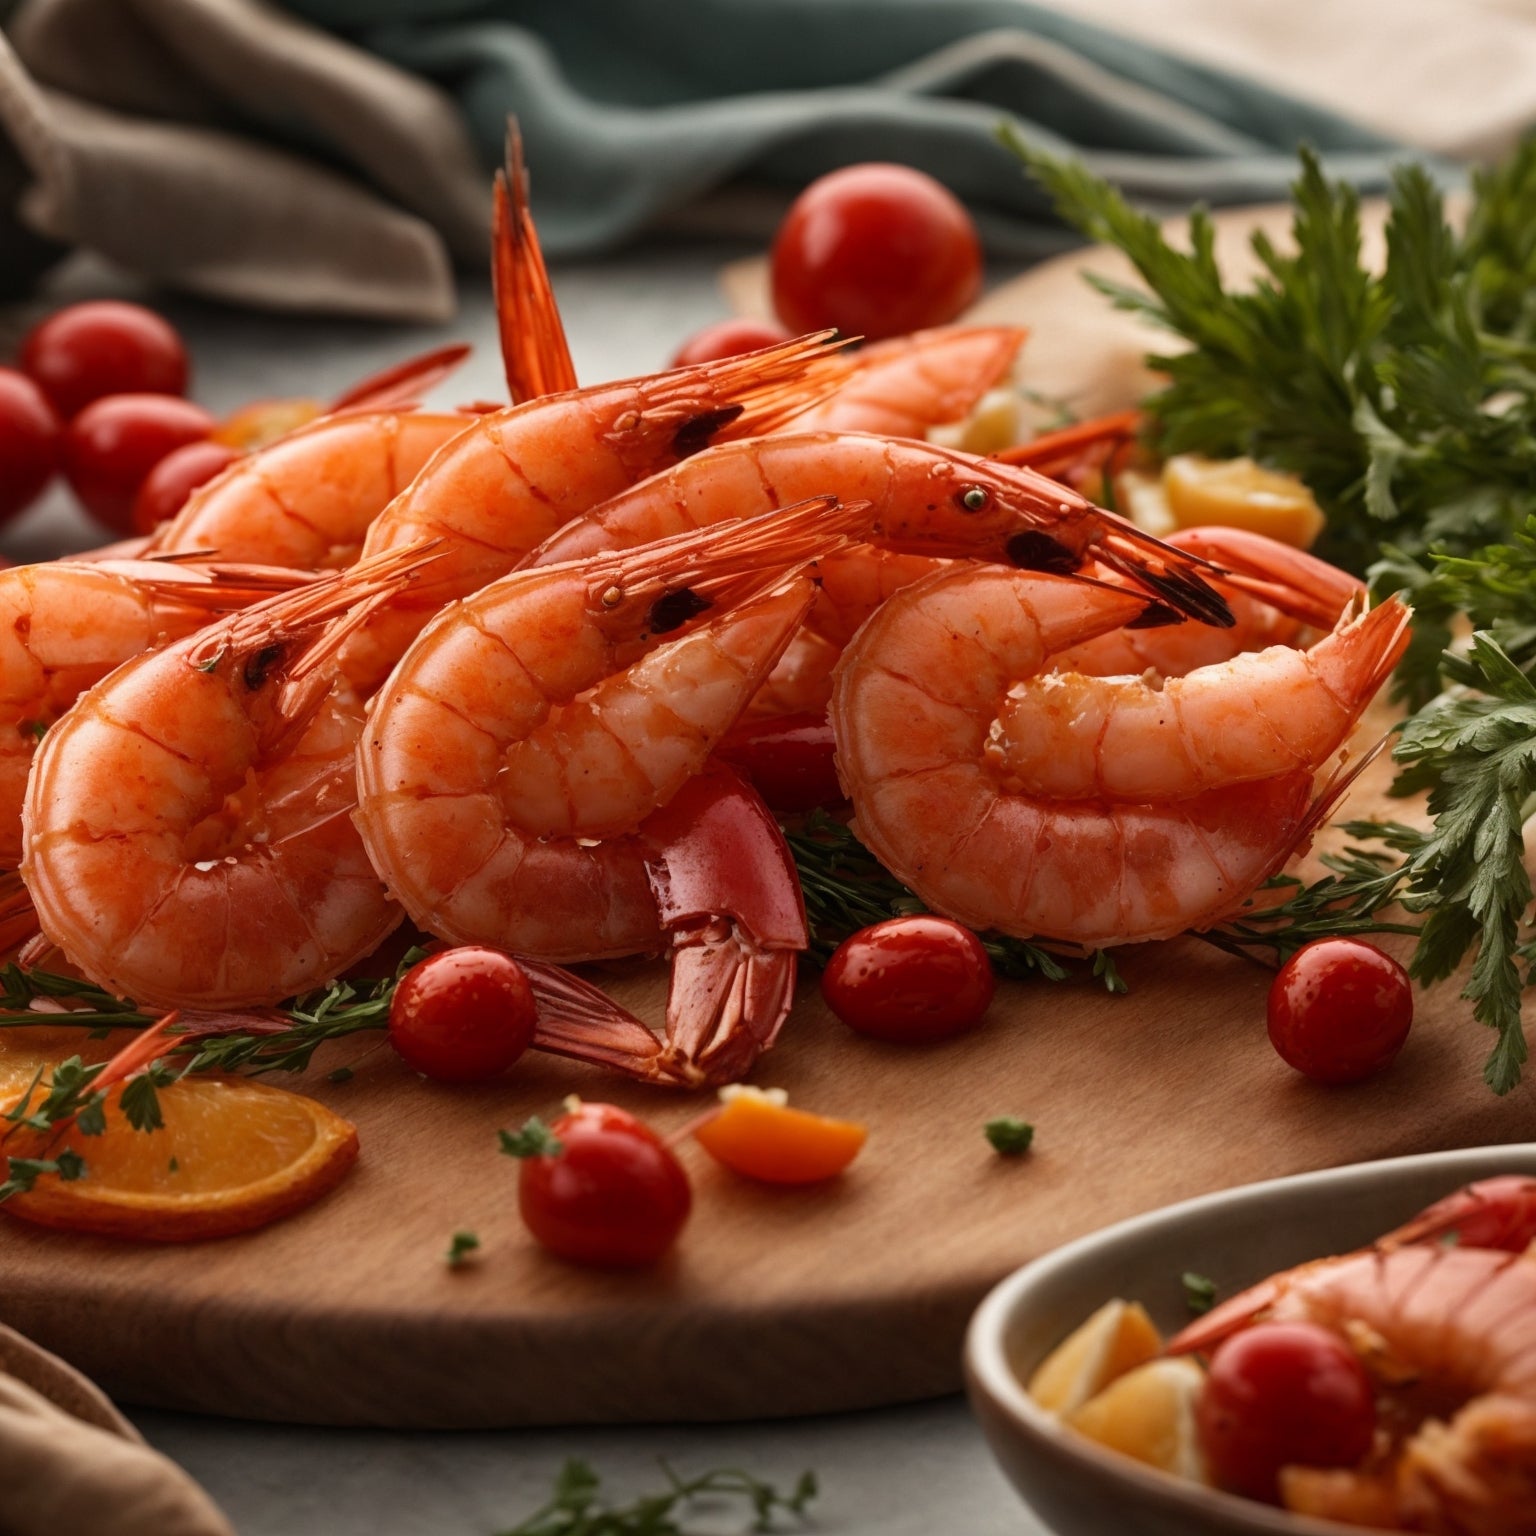 From Ocean to Plate: Global Seafoods' Wild Caught Shrimp Delights